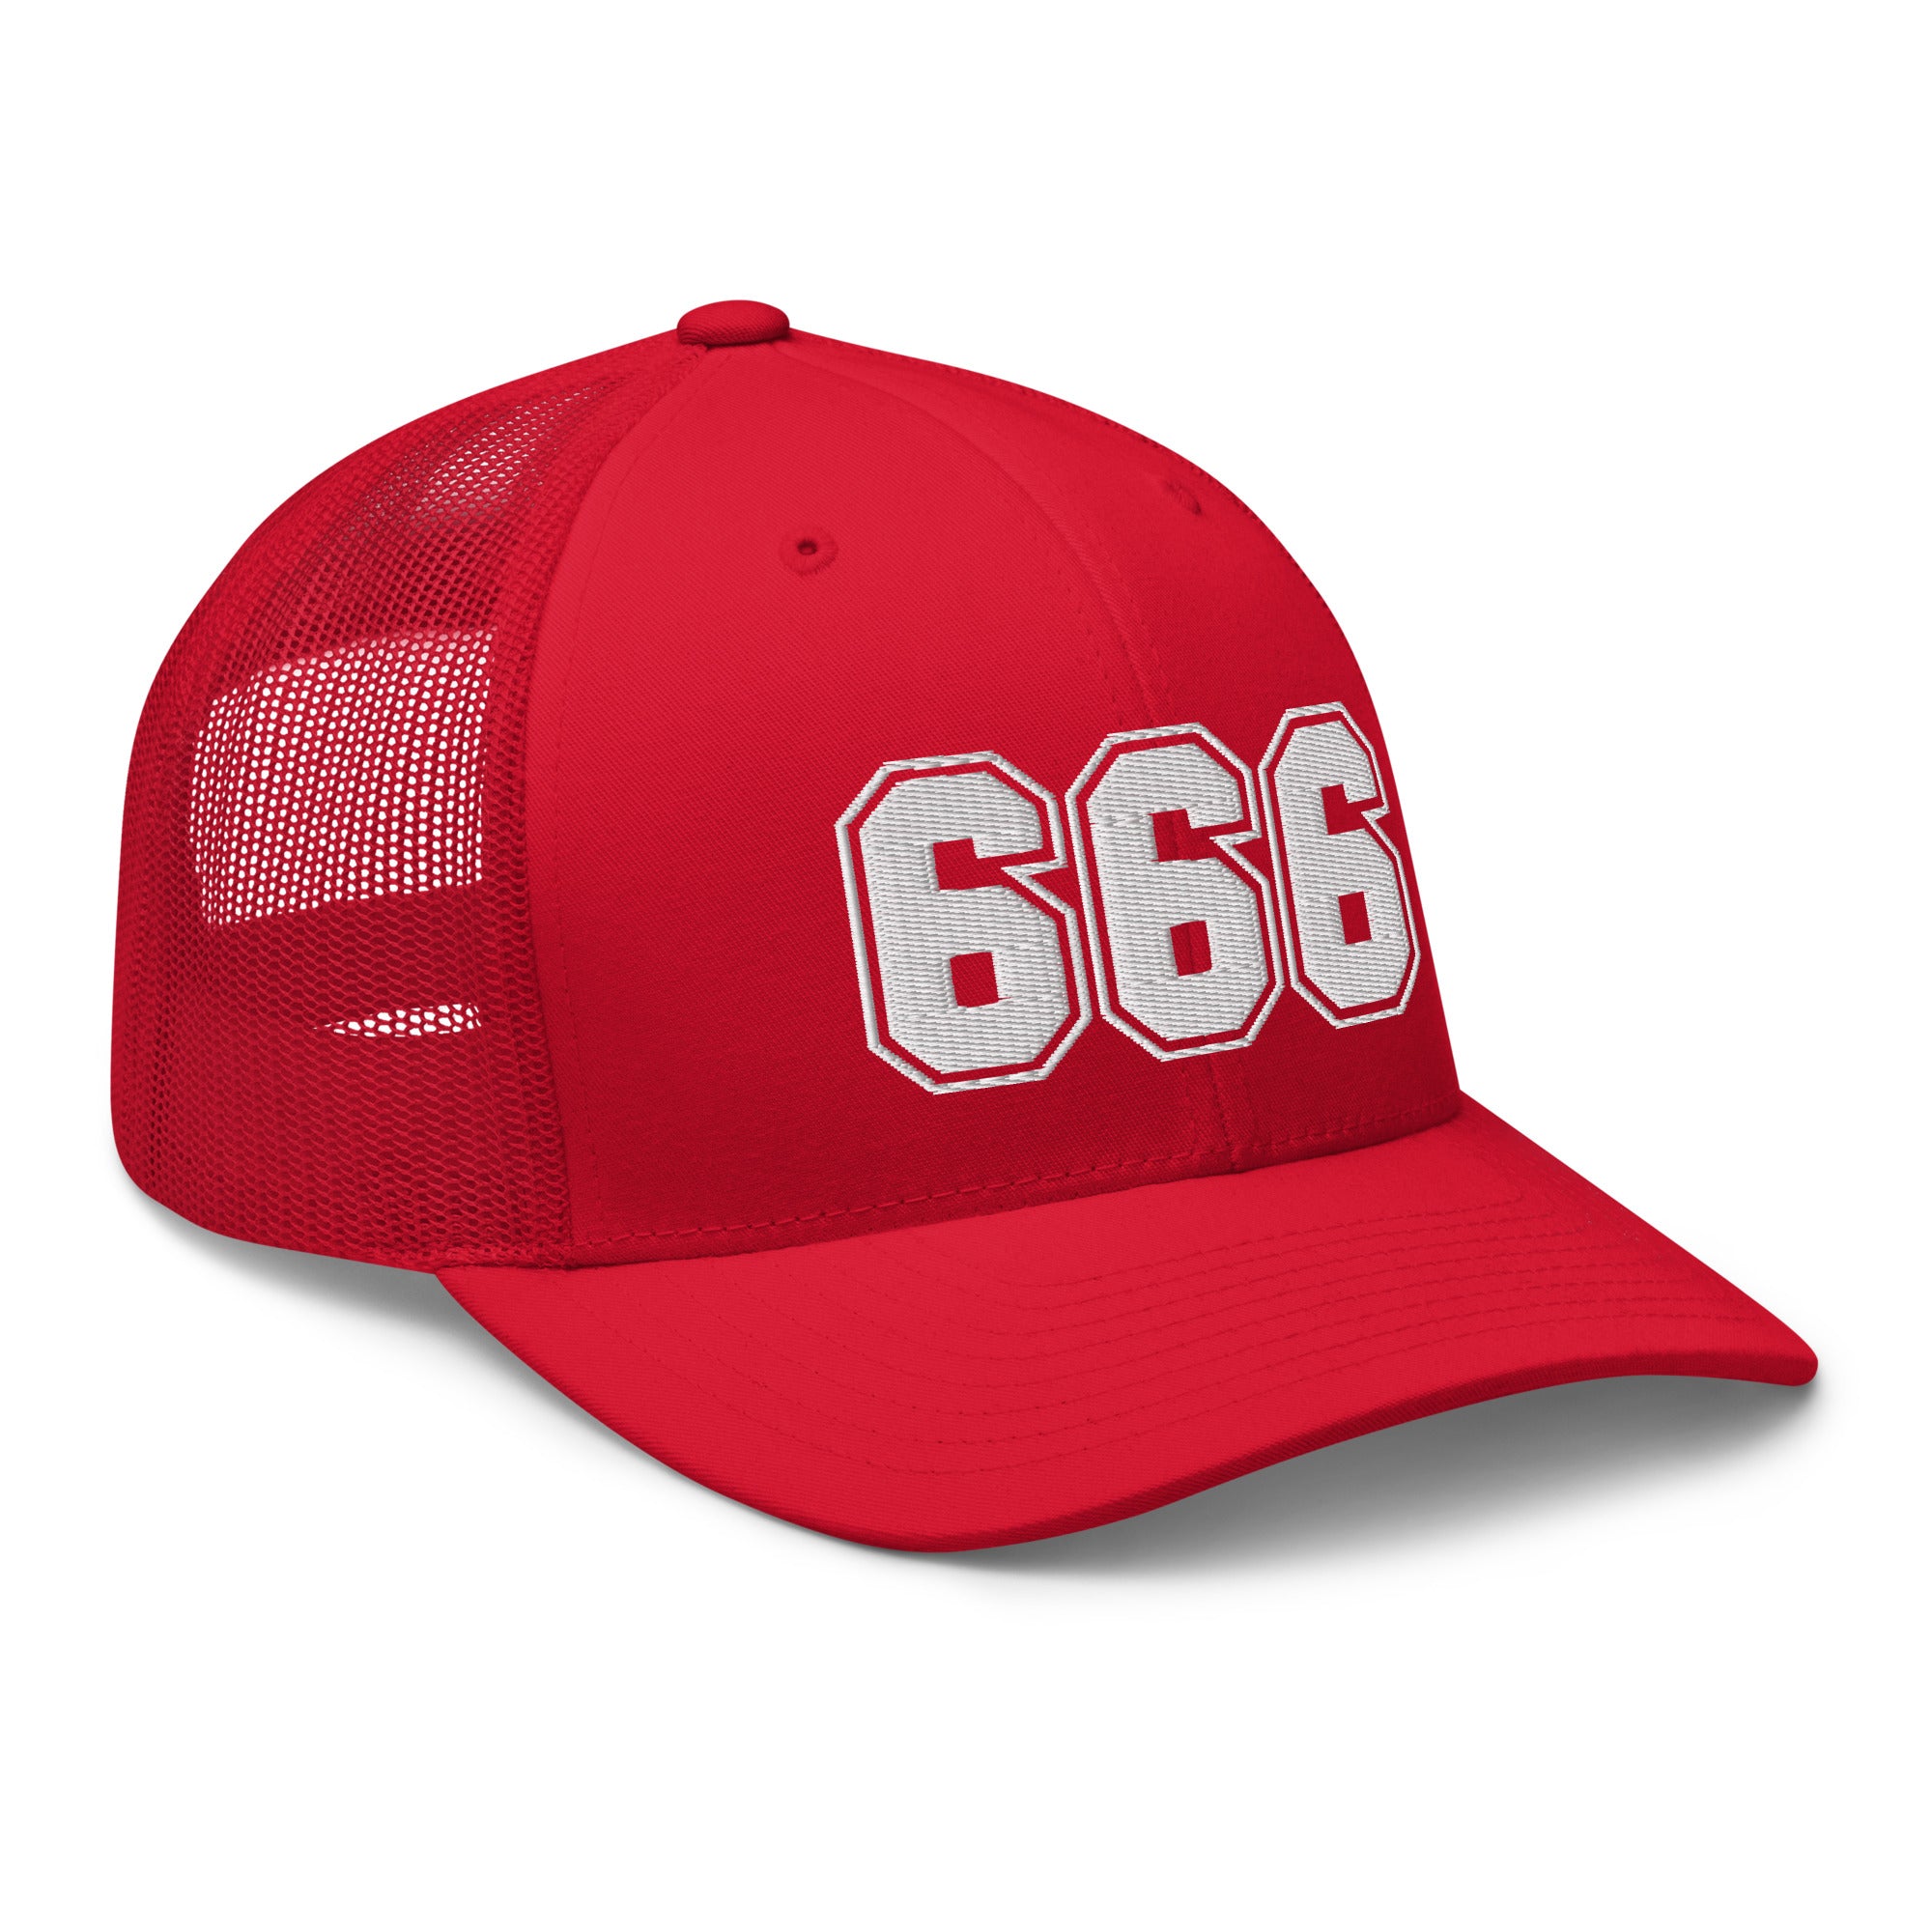 White 666 Number of the Beast Embroidered Retro Trucker Cap Snapback Hat